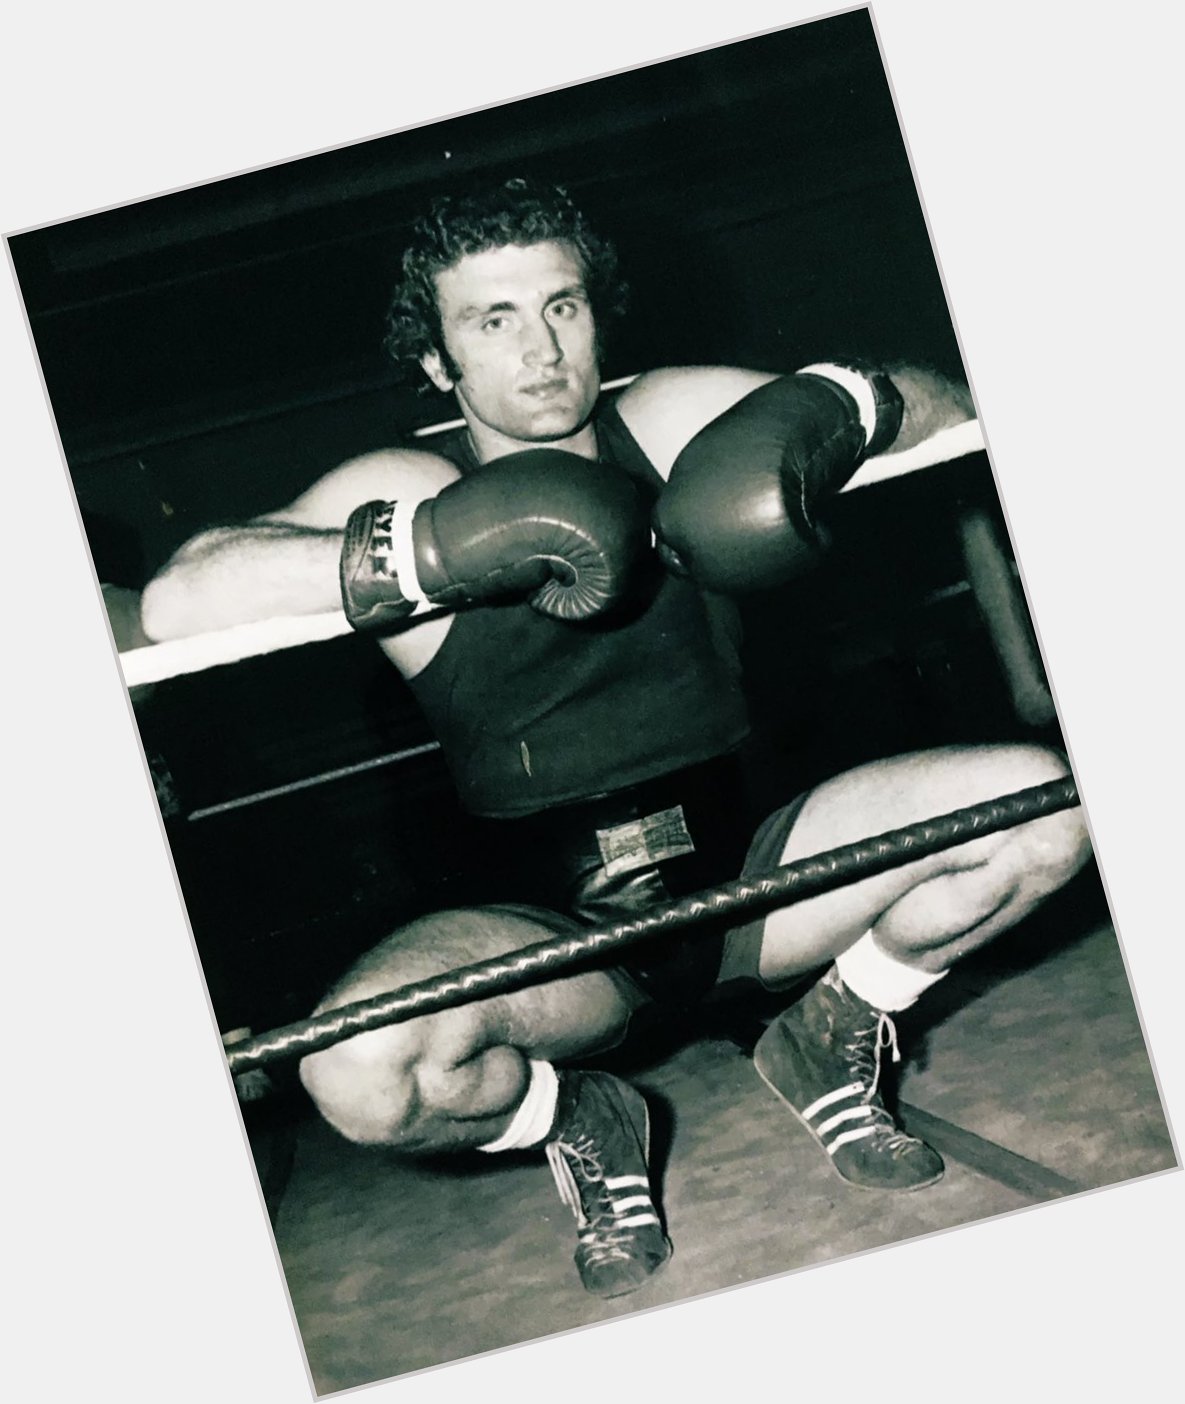 Happy 71st Birthday to the often overlooked Joe Bugner. Have a good one champ 